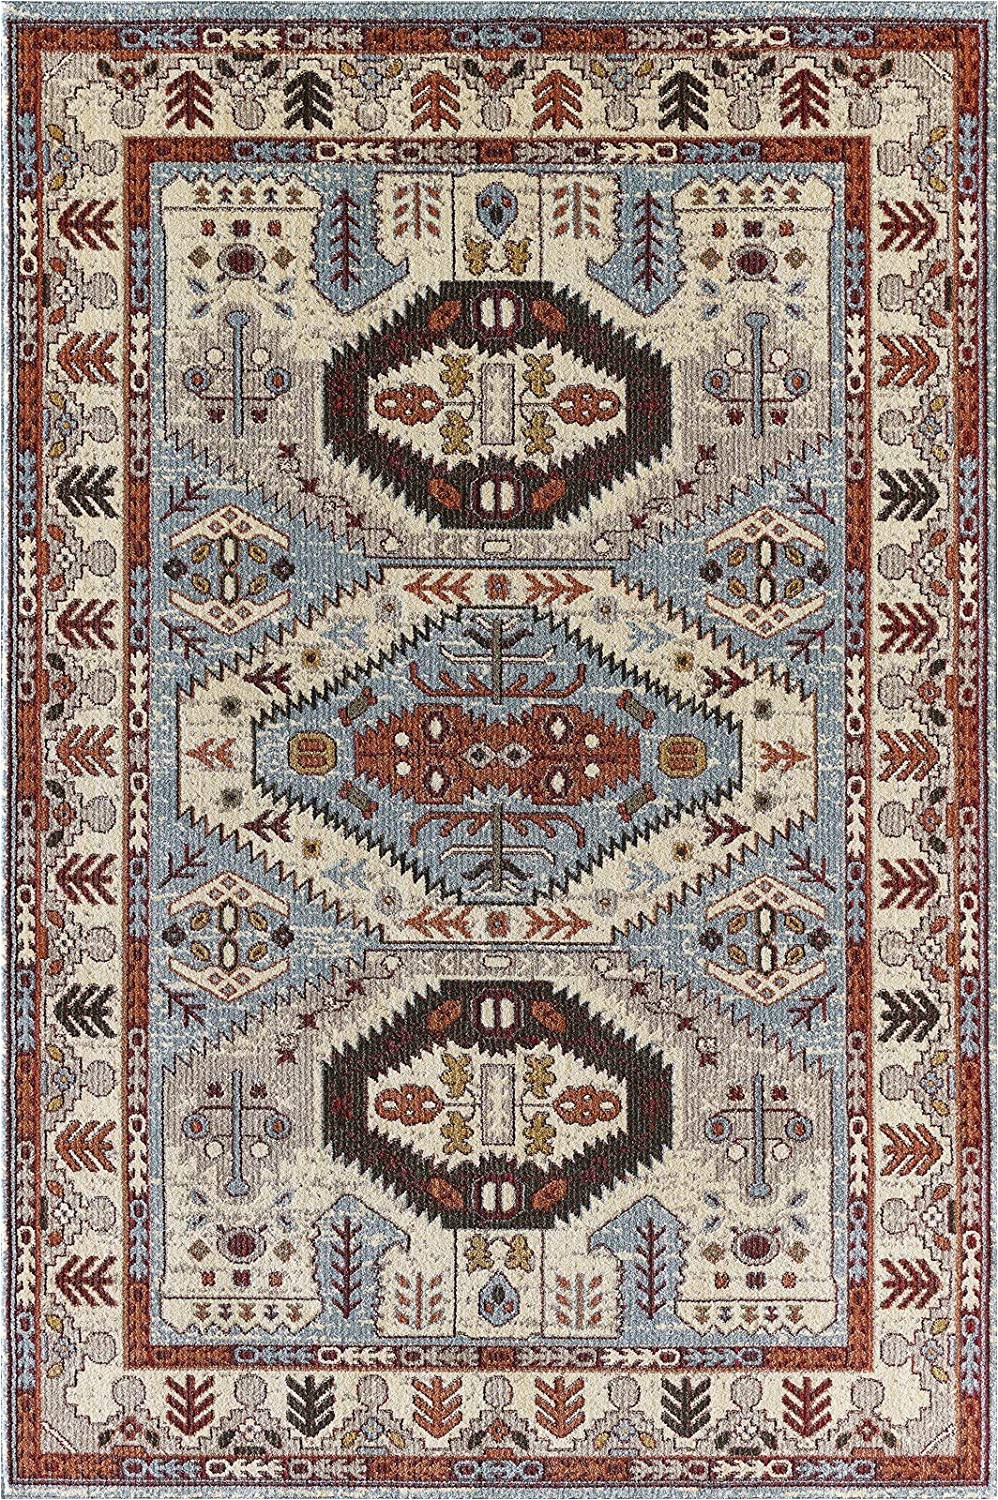 Country area Rugs 8 X 10 Glory Rugs area Rug Tribal Marisela Vintage south West Carpet Traditional Texture for Bedroom Living Dining Room 7316 Gabbeh Collection 8×10